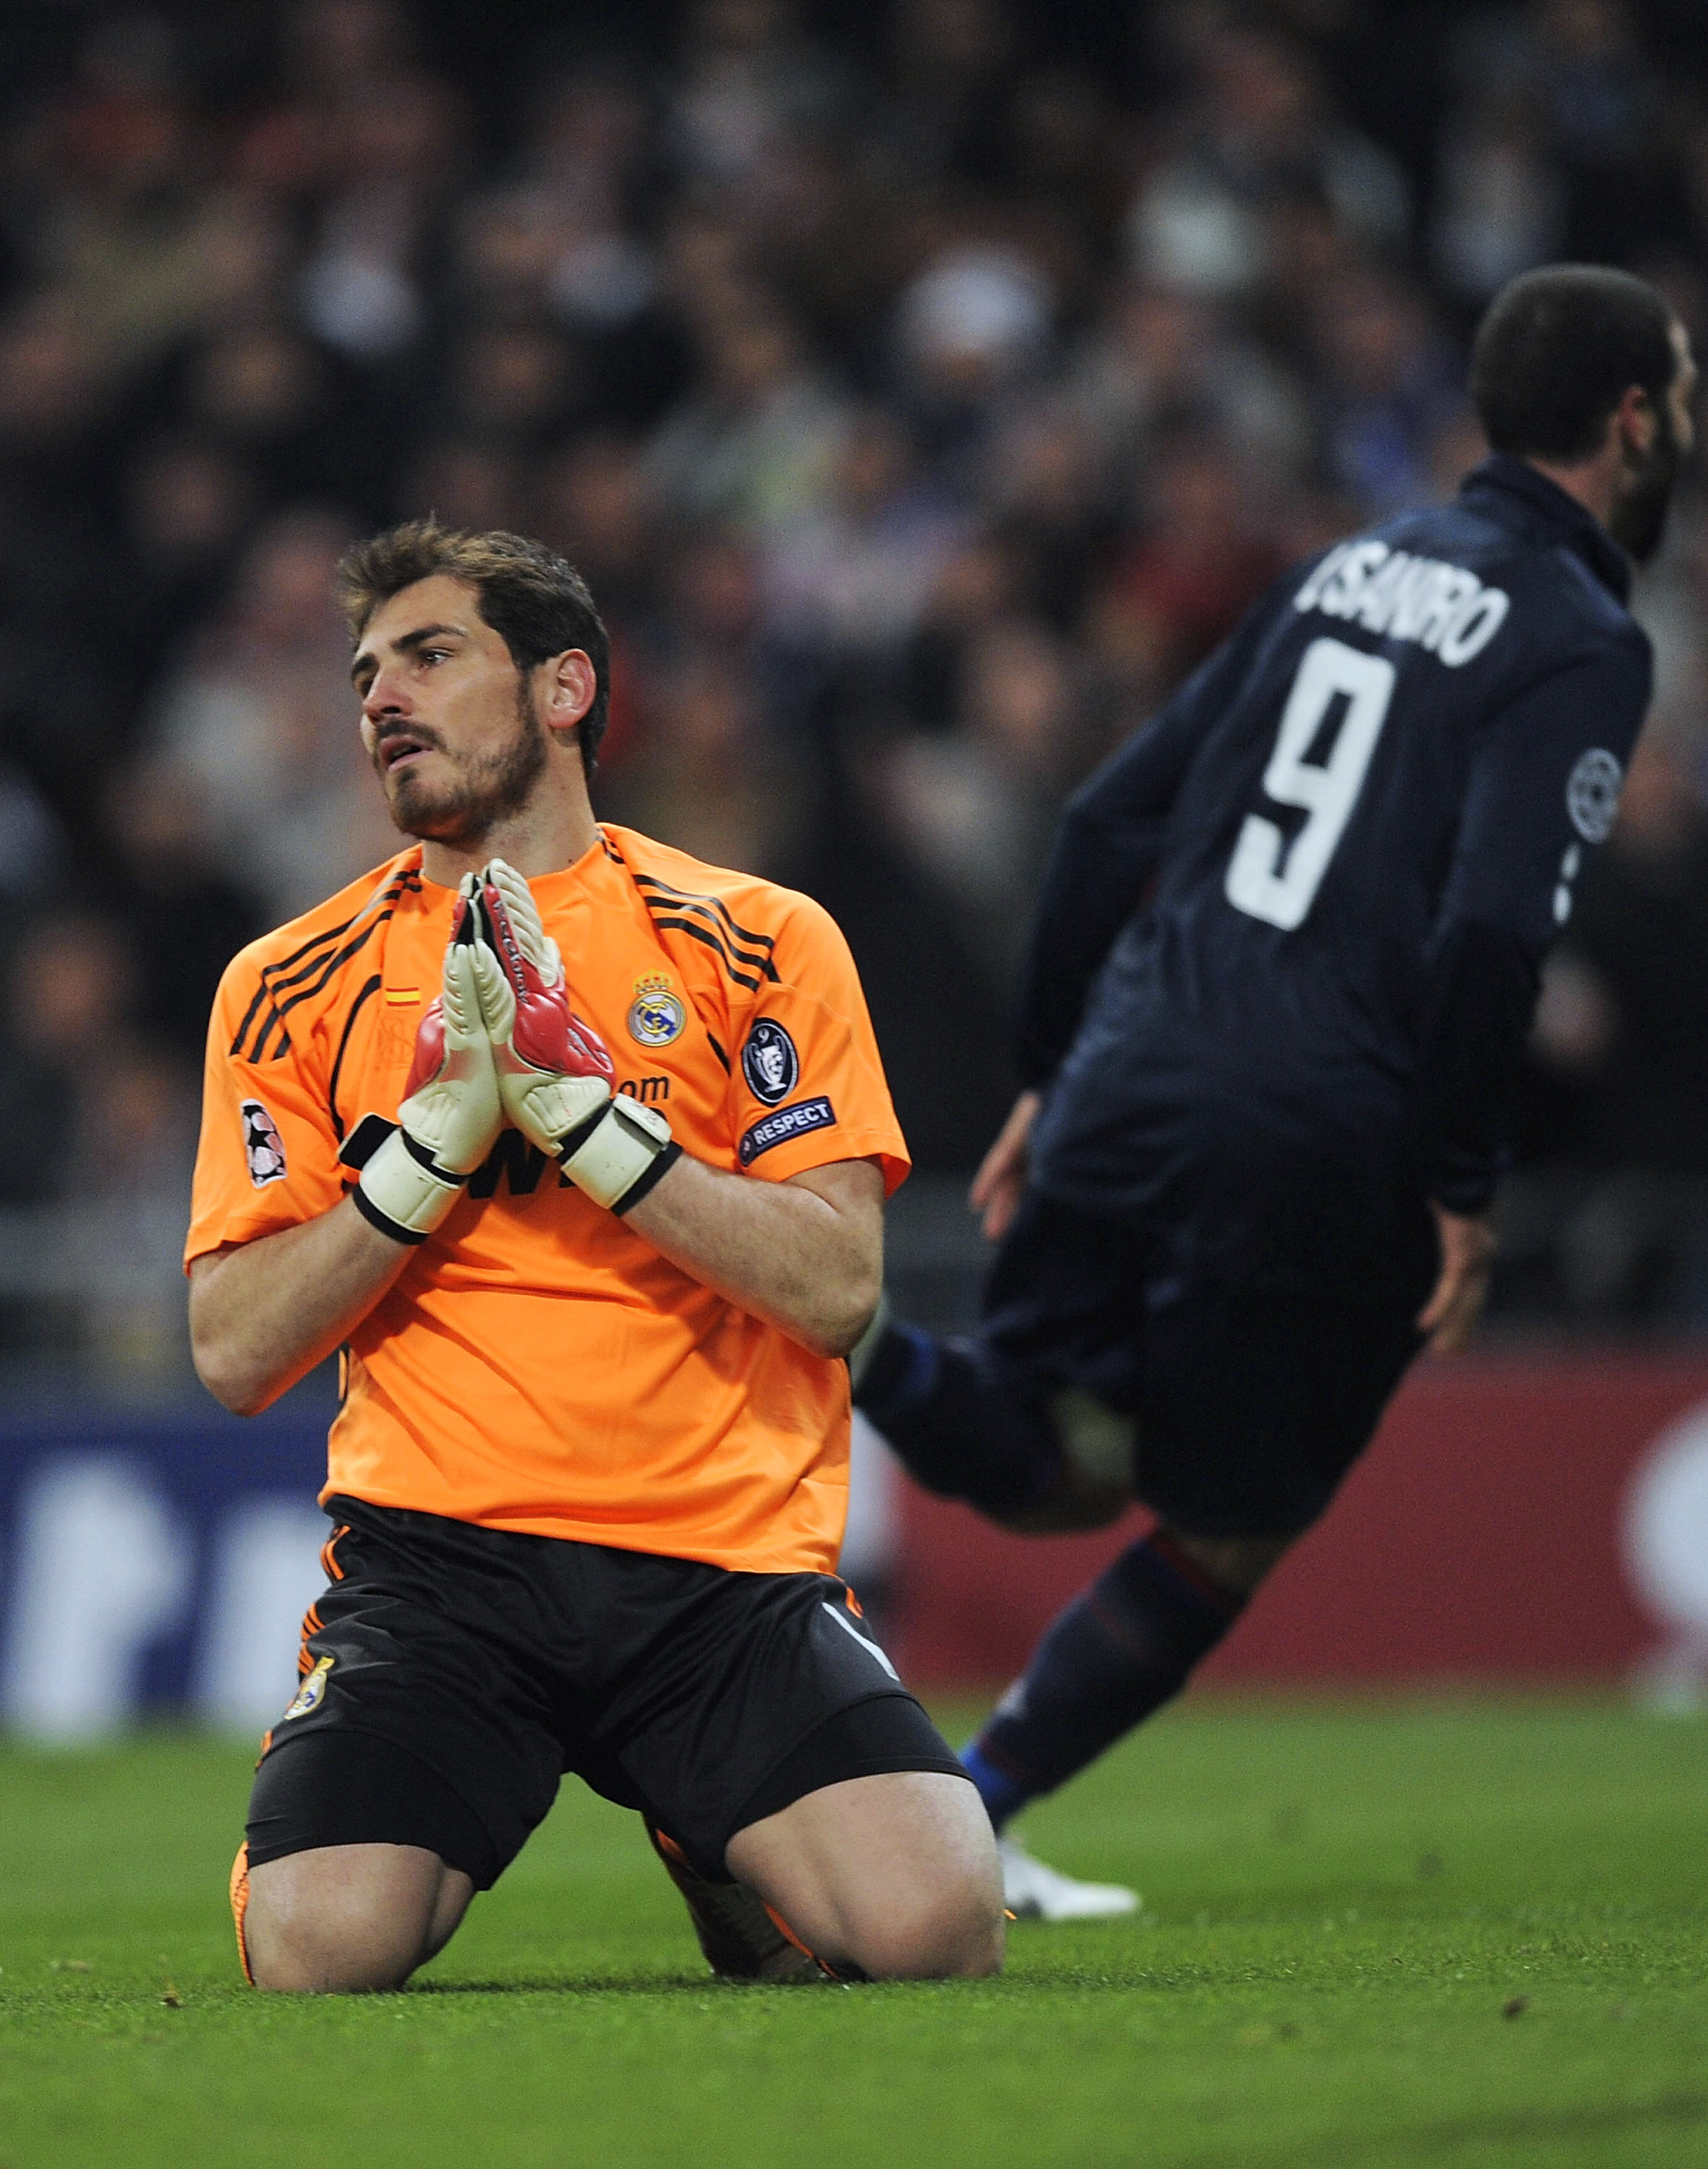 MADRID, SPAIN - MARCH 10: Iker Casillas of Real Madrid reacts after Olympique Lyonnais scored their first goal during the UEFA Champions League round of 16 2nd leg match between  Real Madrid and Olympique Lyonnais at Estadio Santiago Bernabeu on March 10,